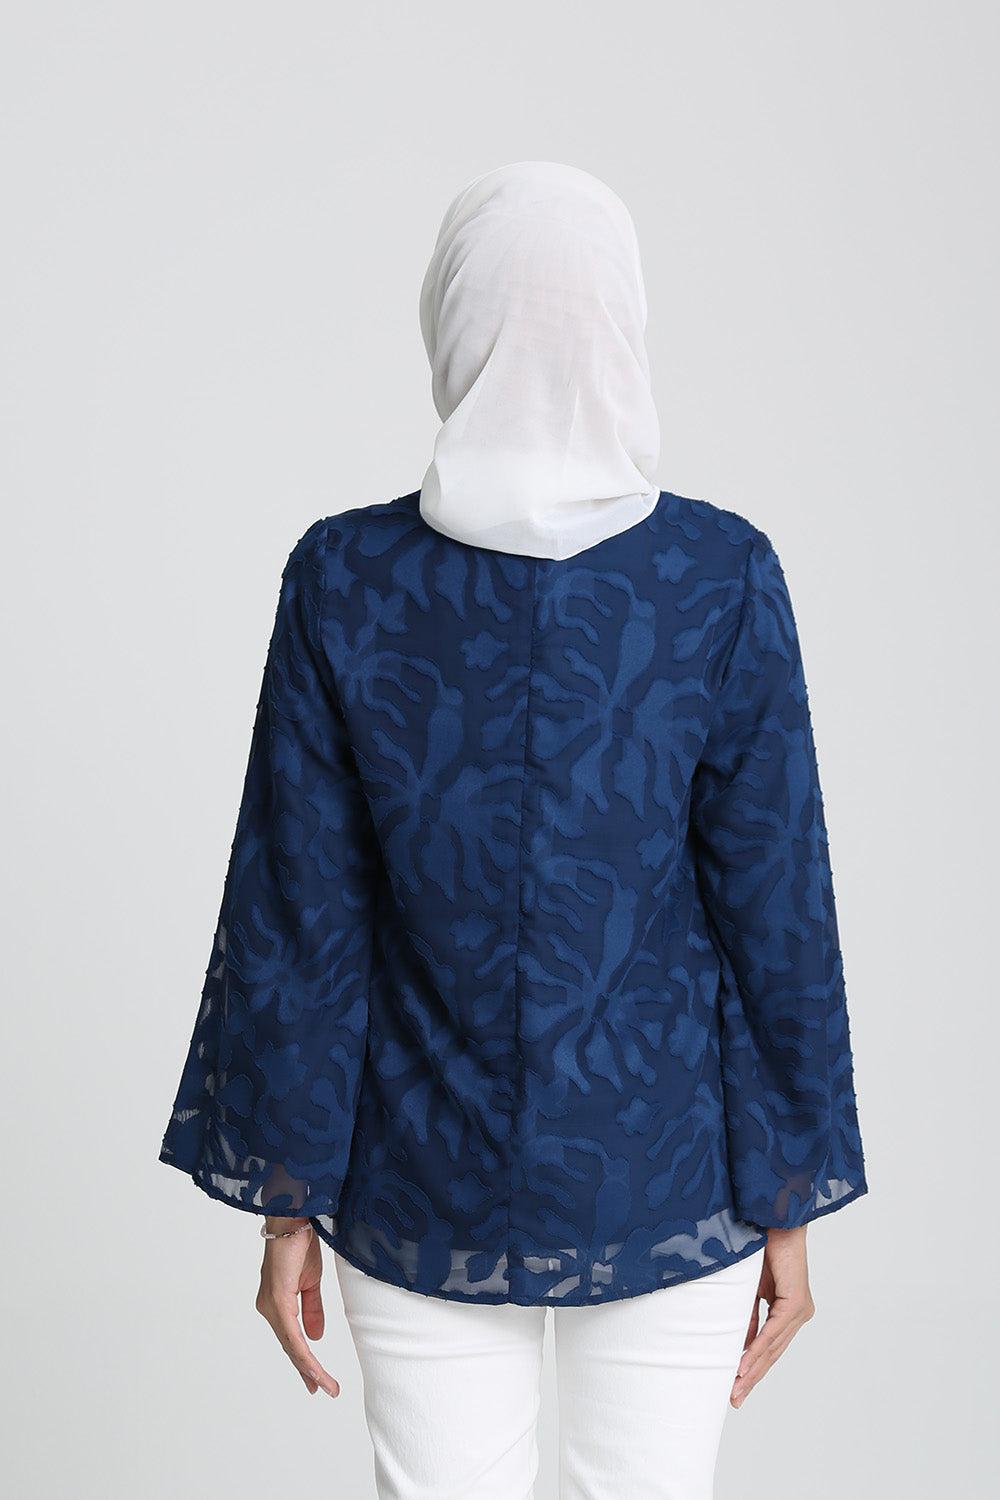 The Rehati Blouse in Navy Blue